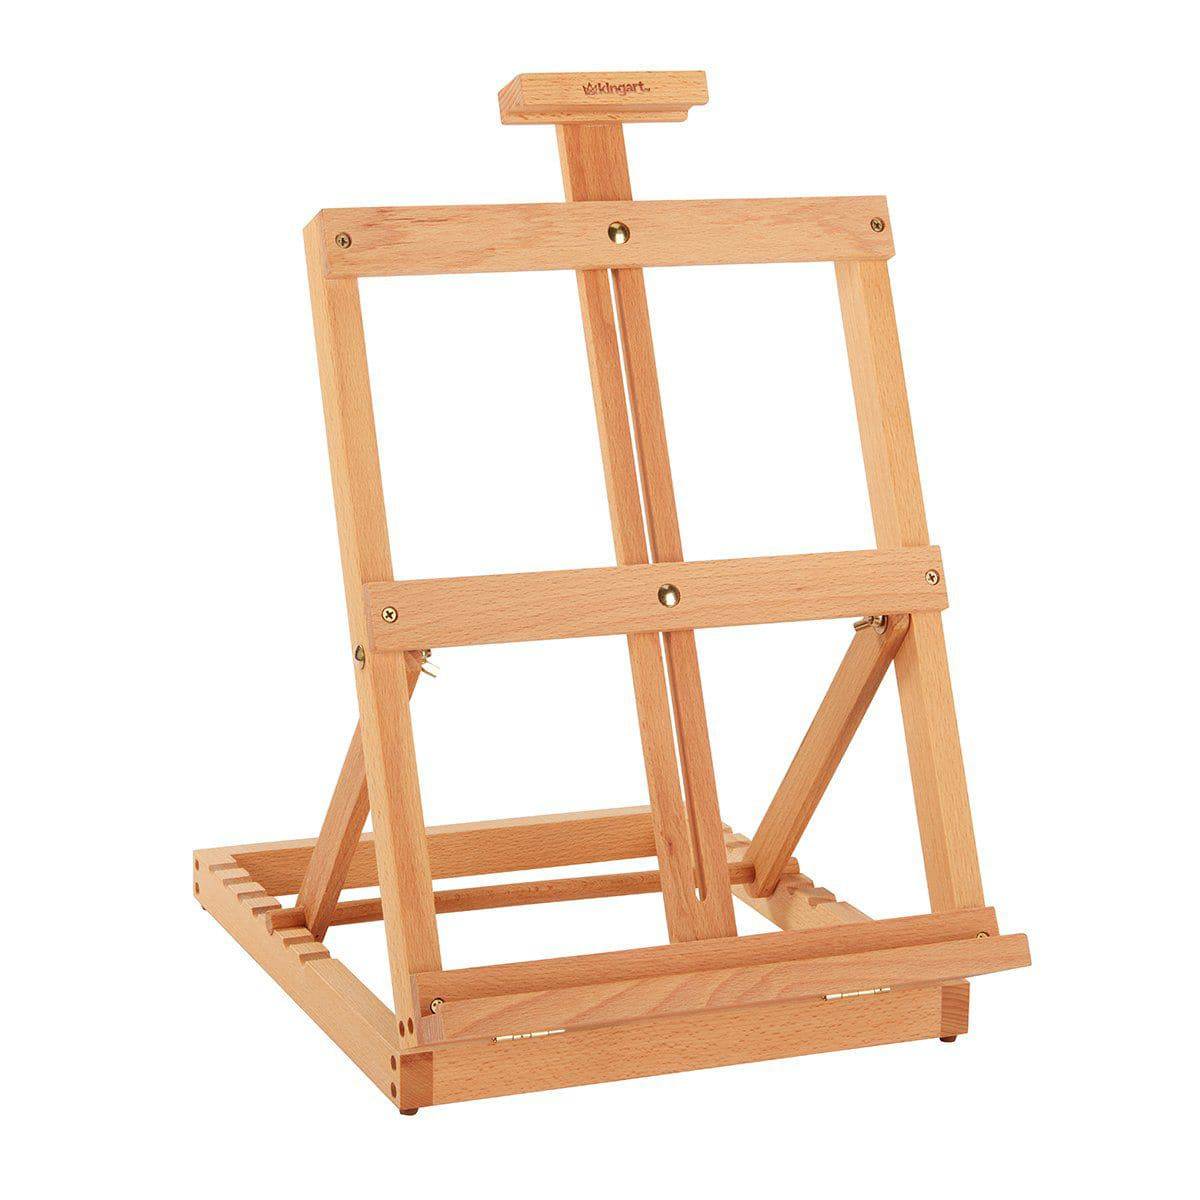 U.S. Art Supply 16 Mini Tabletop Wooden H-Frame Studio Easel (Pack of 6) -  Adjustable Beechwood Painting and Display Easel, Holds Up To 12 Canvas